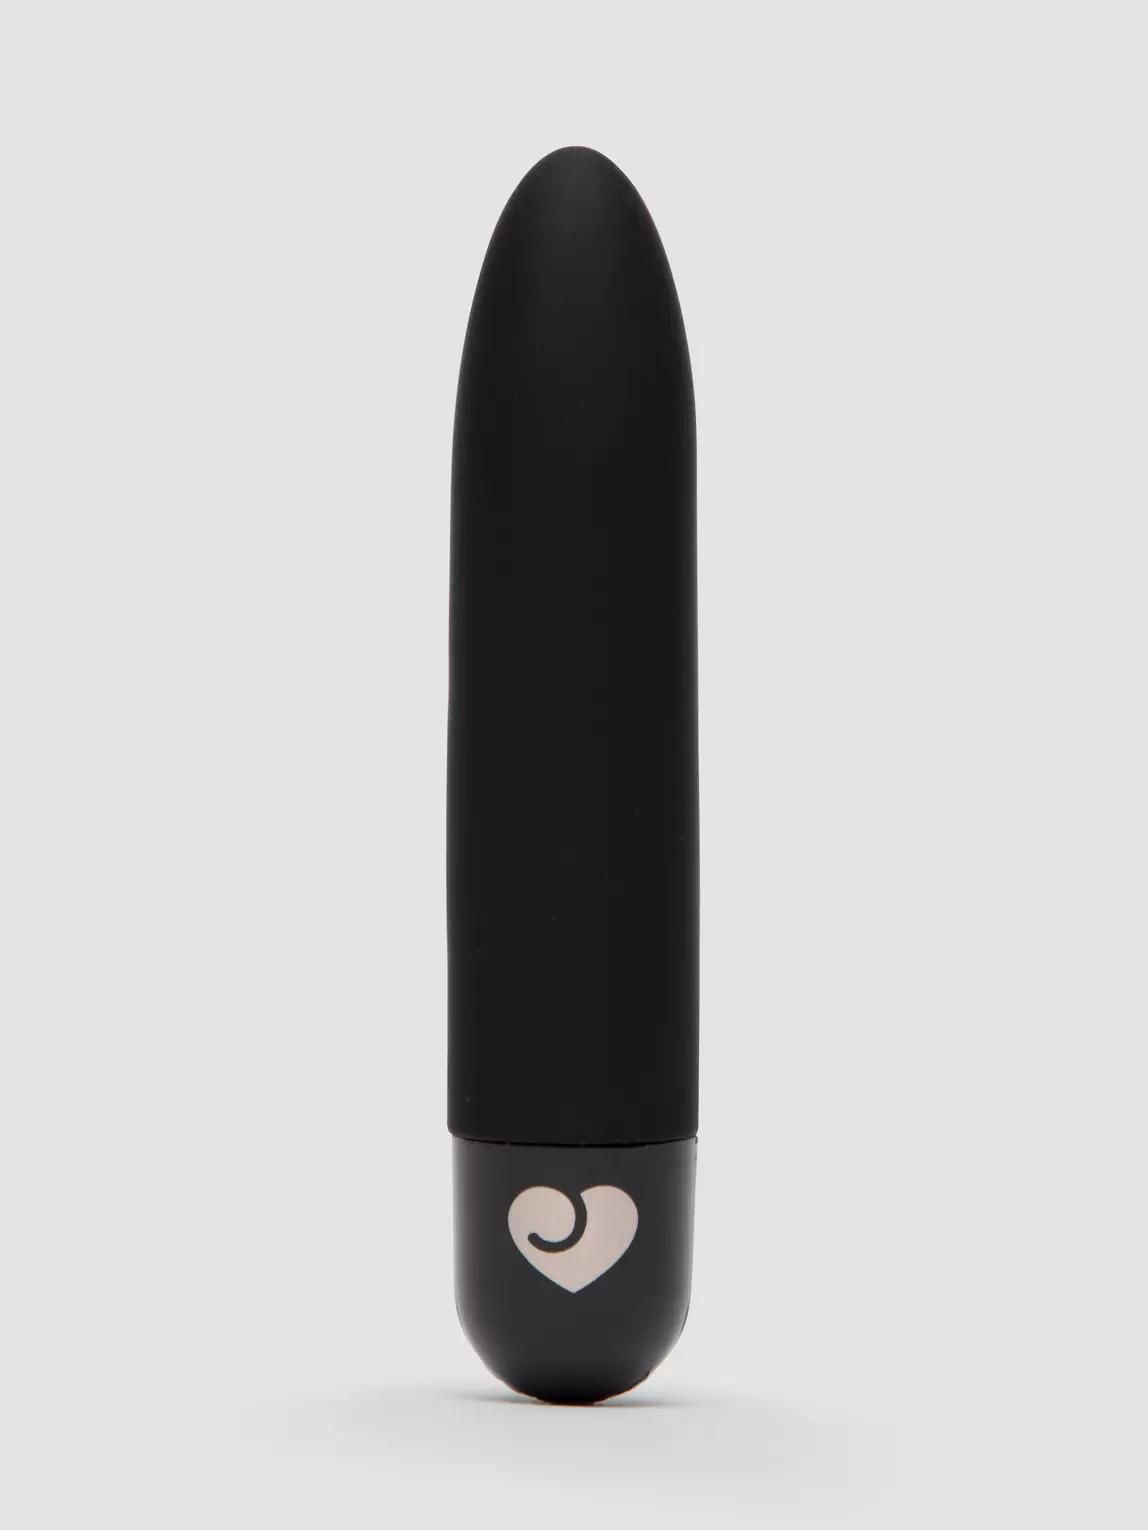 Sex-Toy is what I love the nearly any